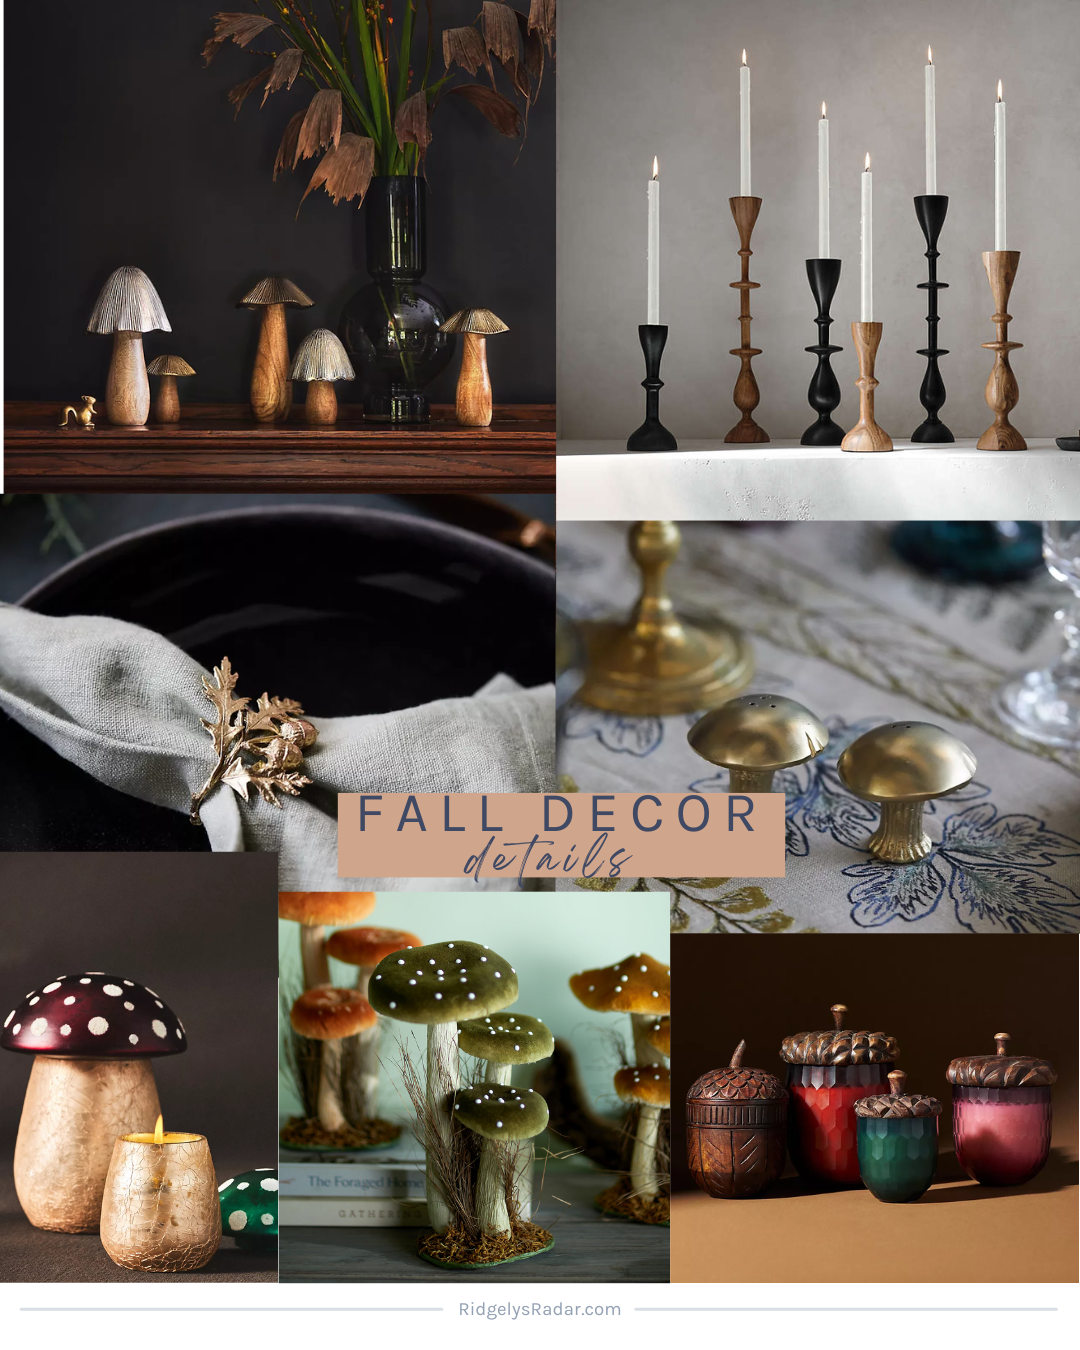 Already have enough Fall decor? Then weed out the things you don't use or like and focus on the special details like toadstools!